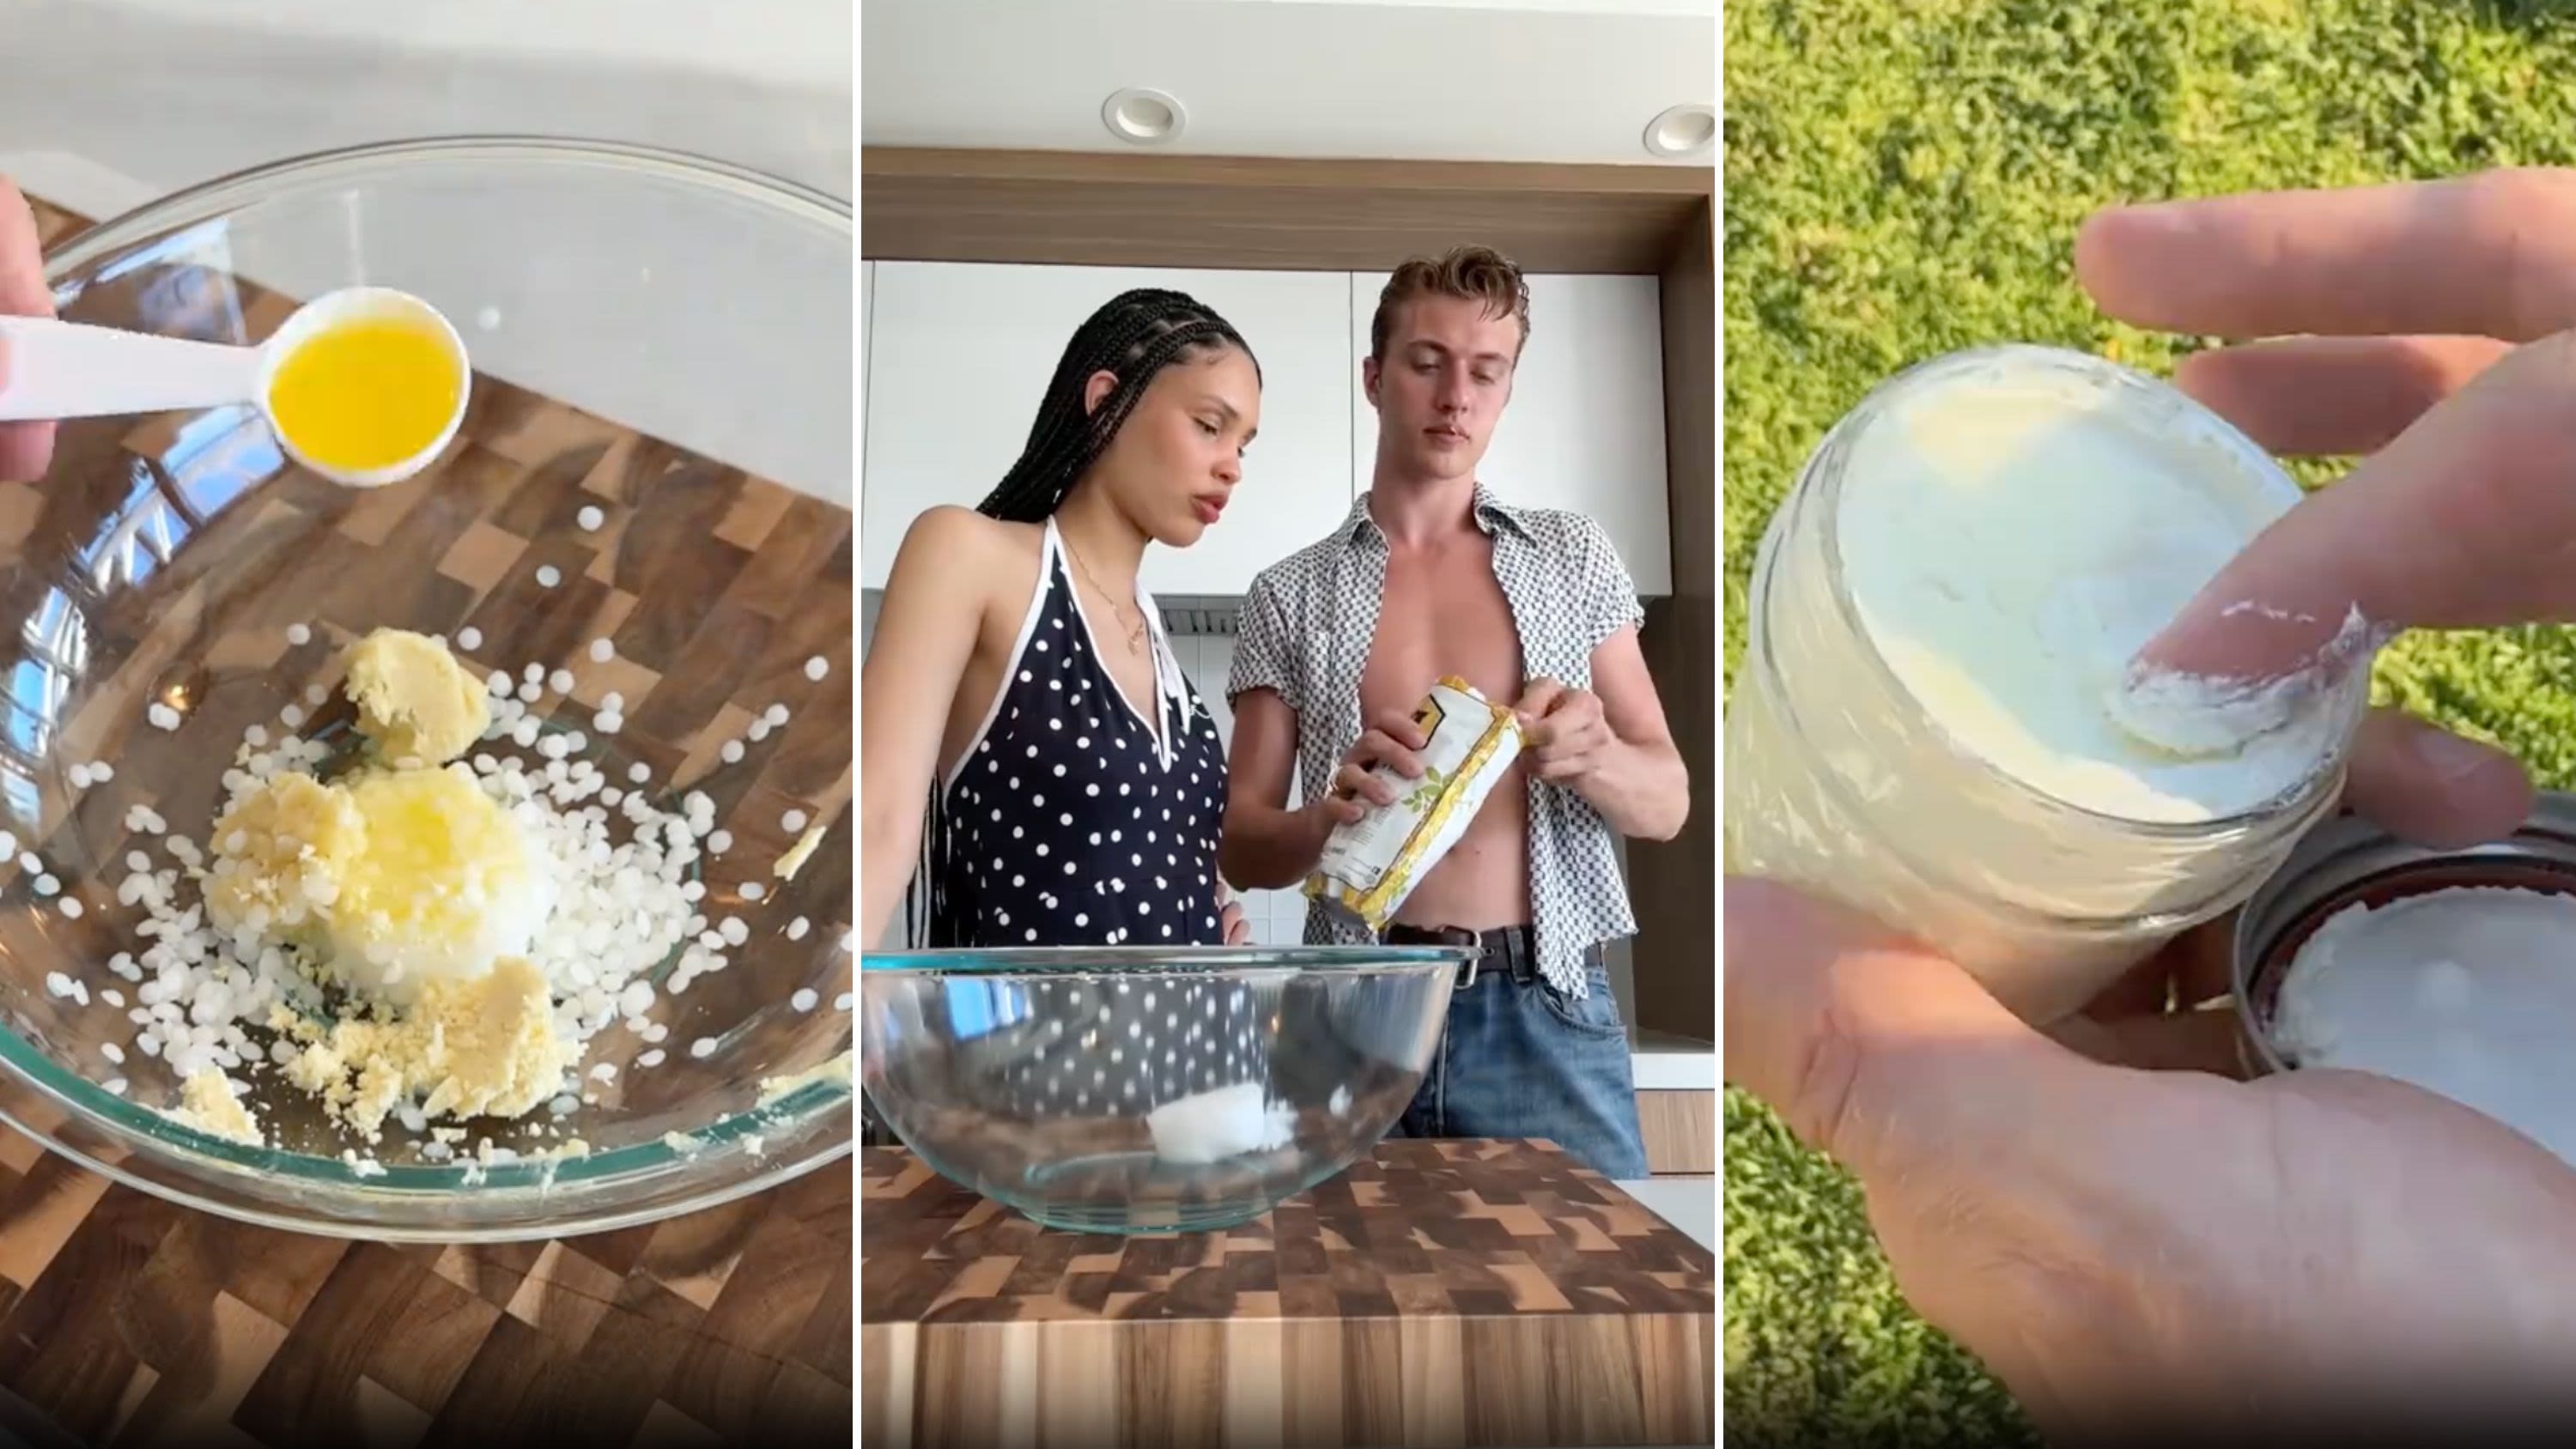 Homemade sunscreen recipes are being shared on TikTok. For skin health, skip this DIY project, experts warn.